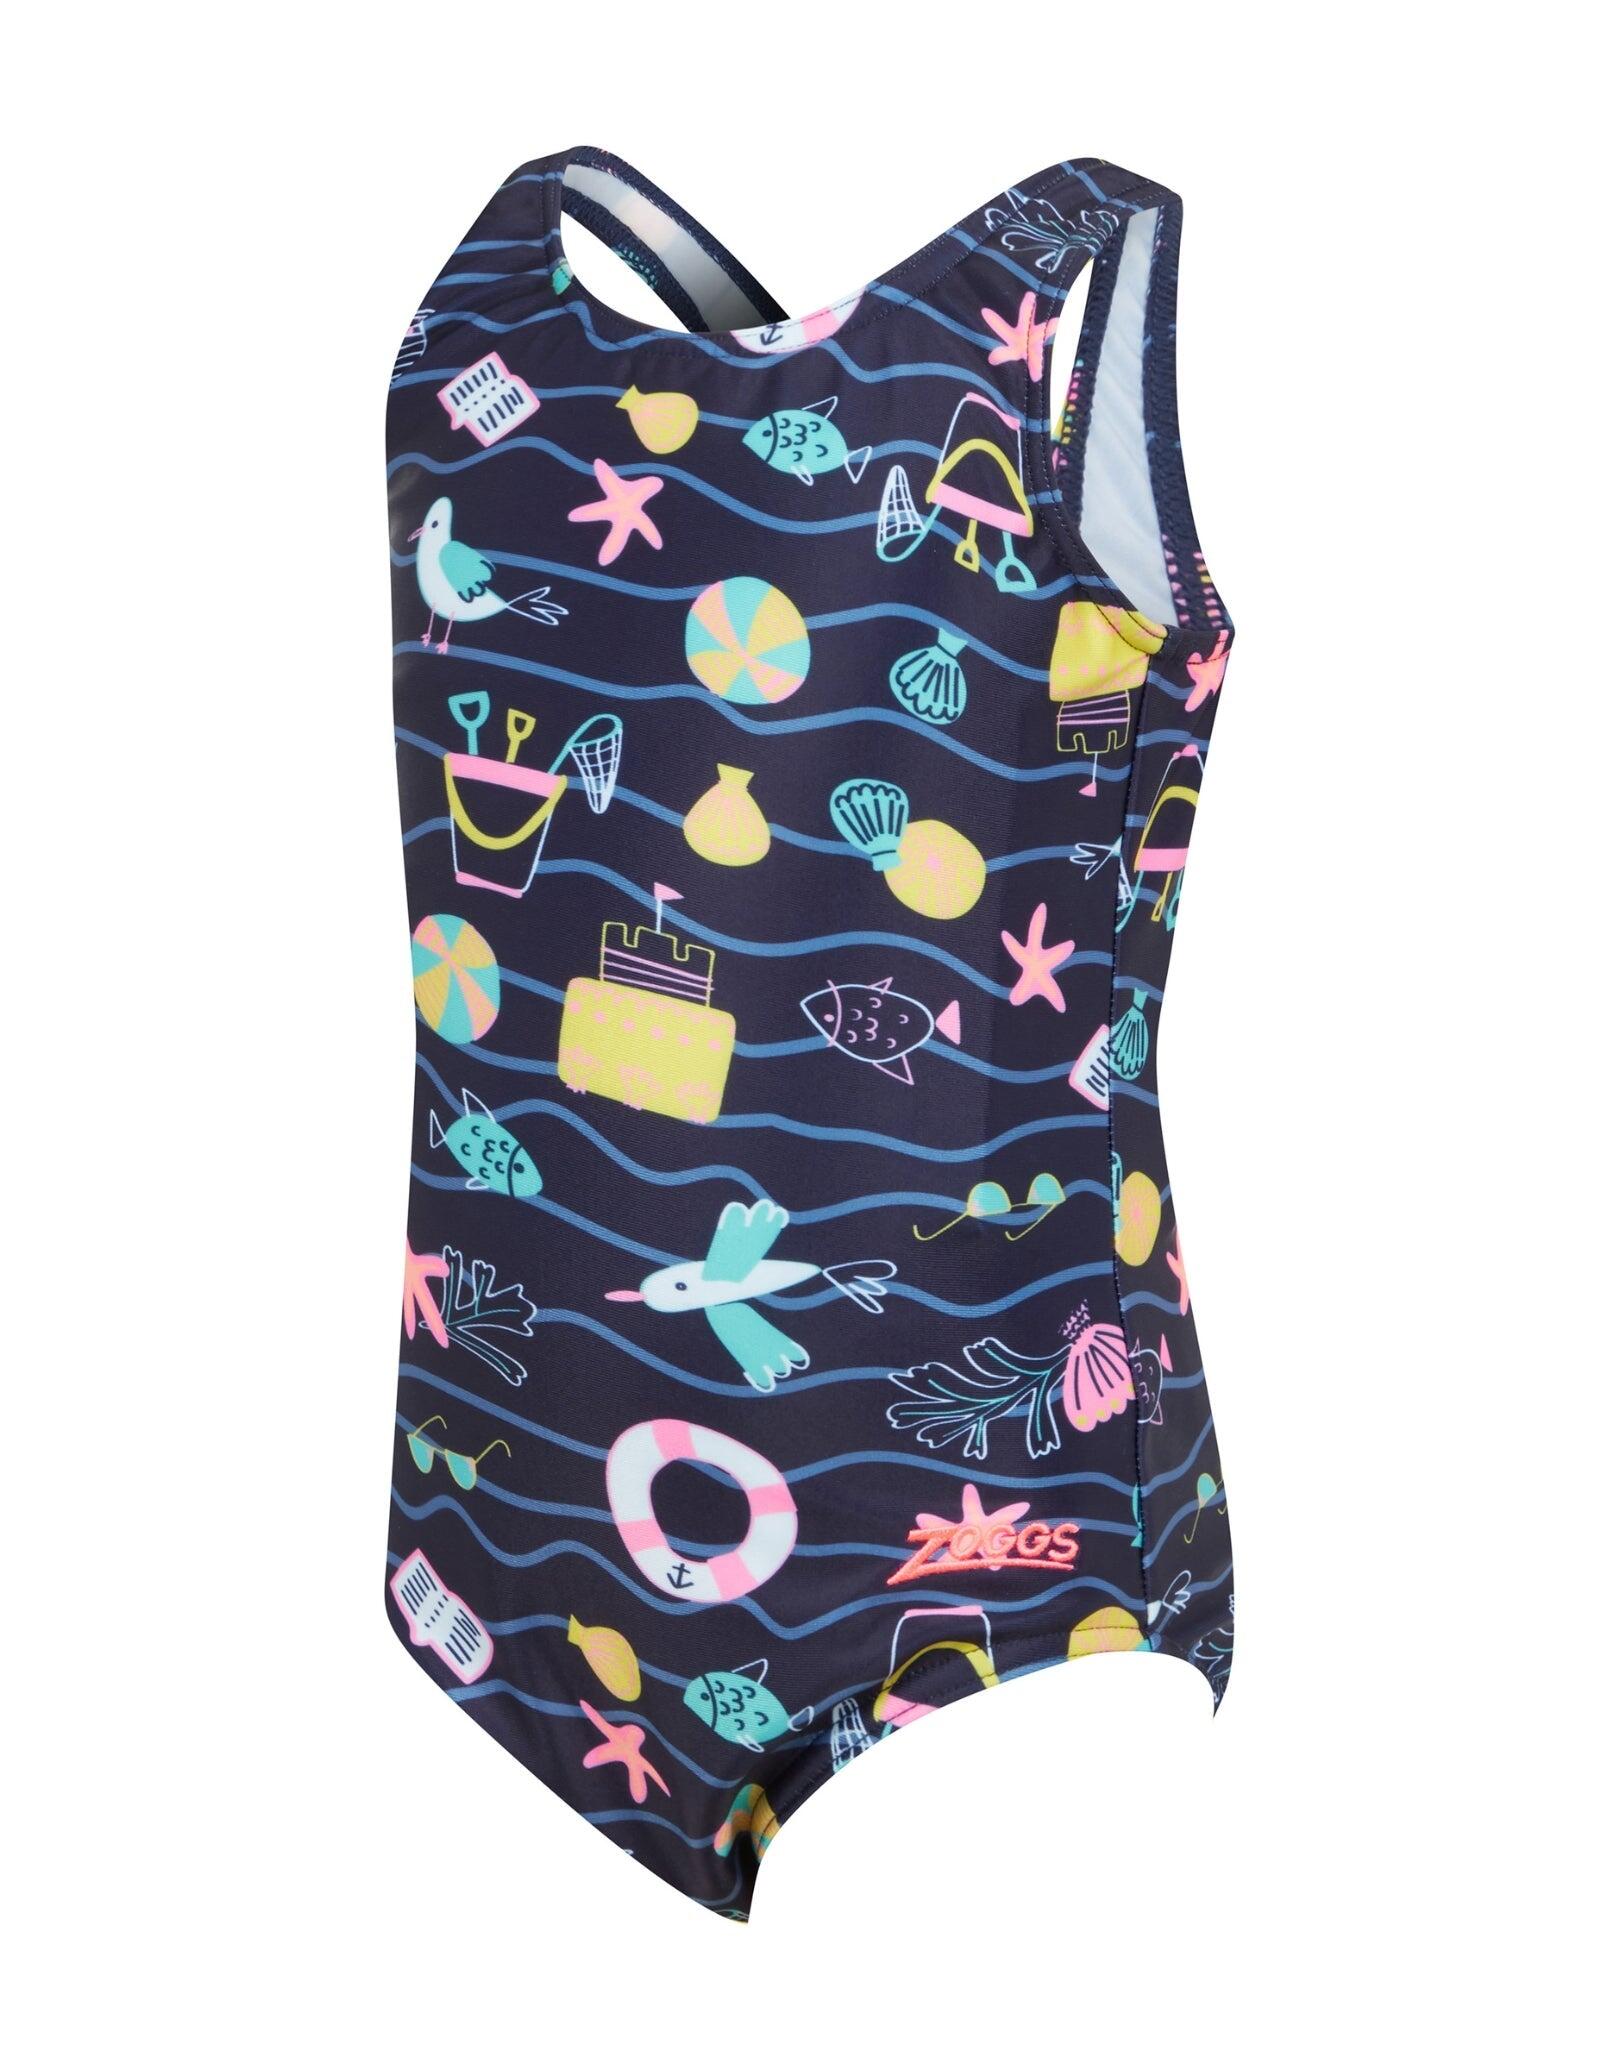 Zoggs Tots Girls Holly Day Scoopback Swimsuit - Navy/Multi 4/5